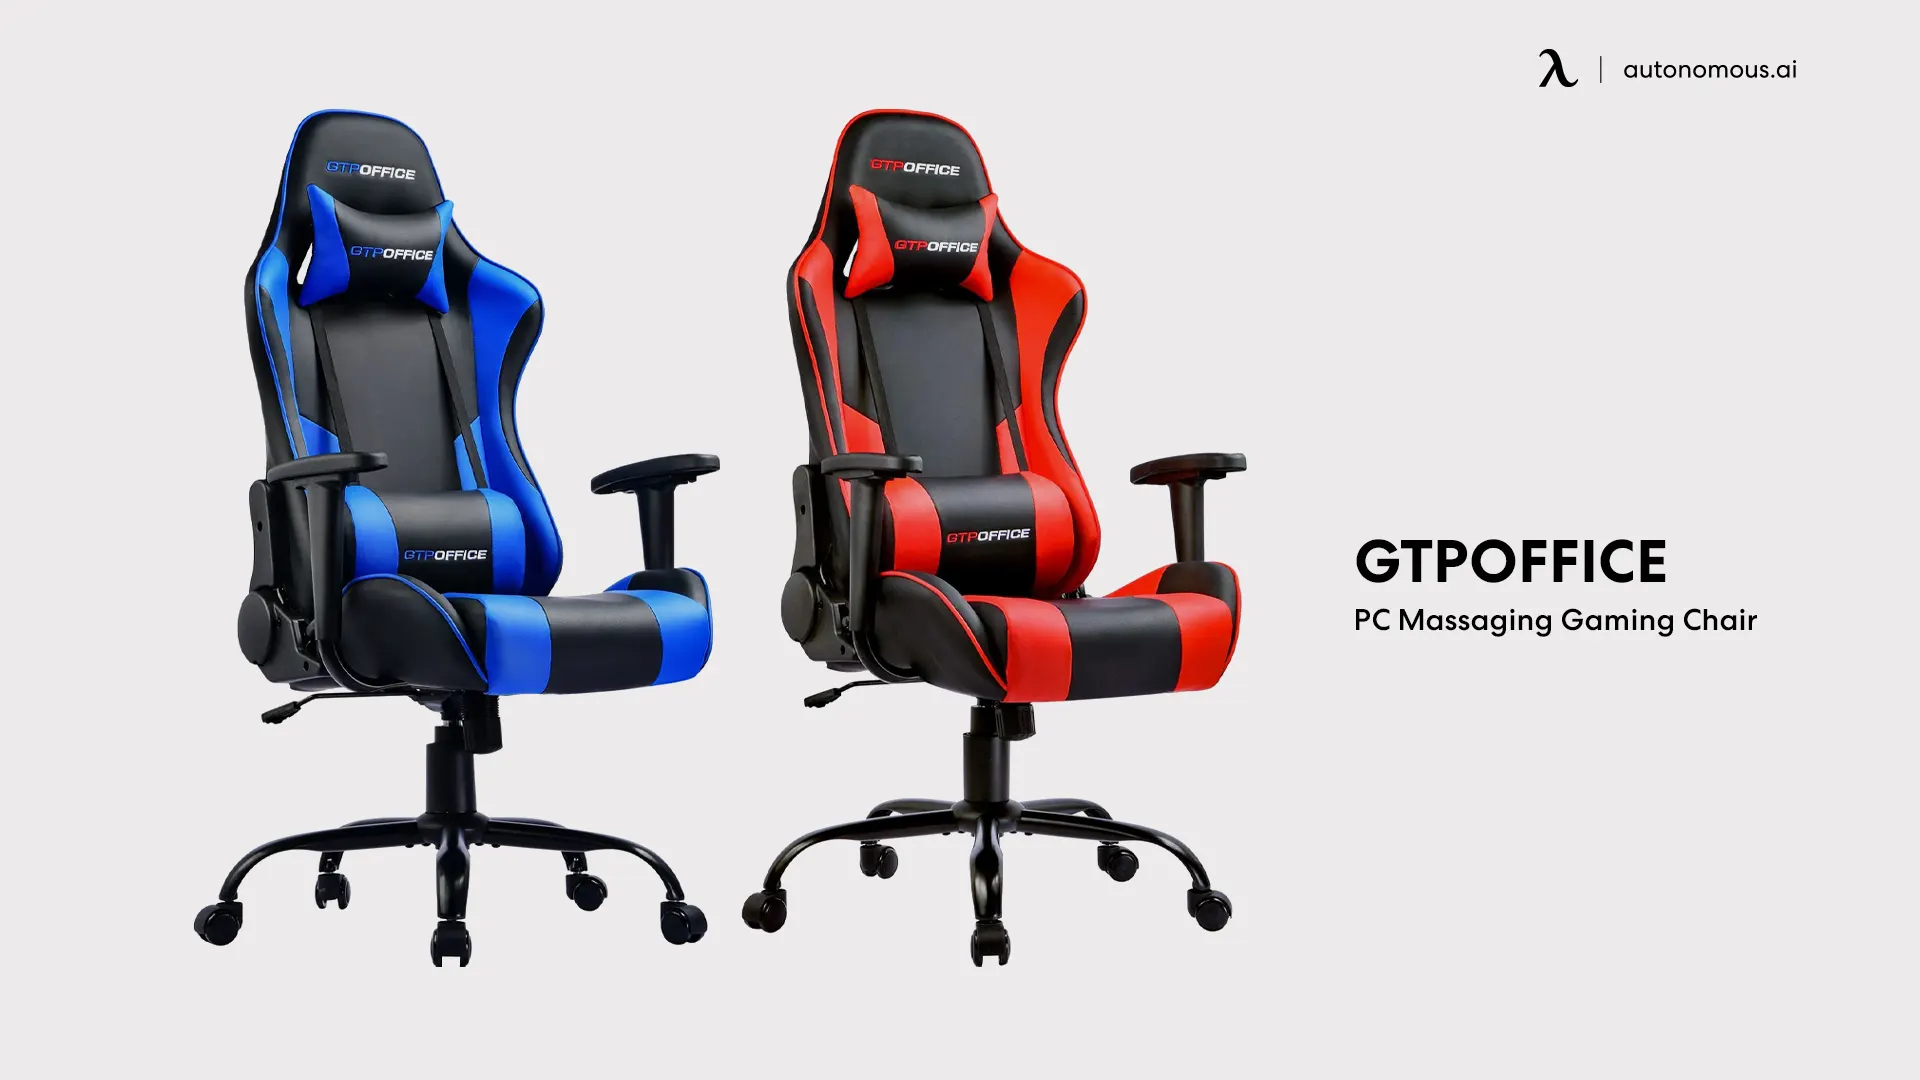 GTPOffice PC Massaging Gaming Chair